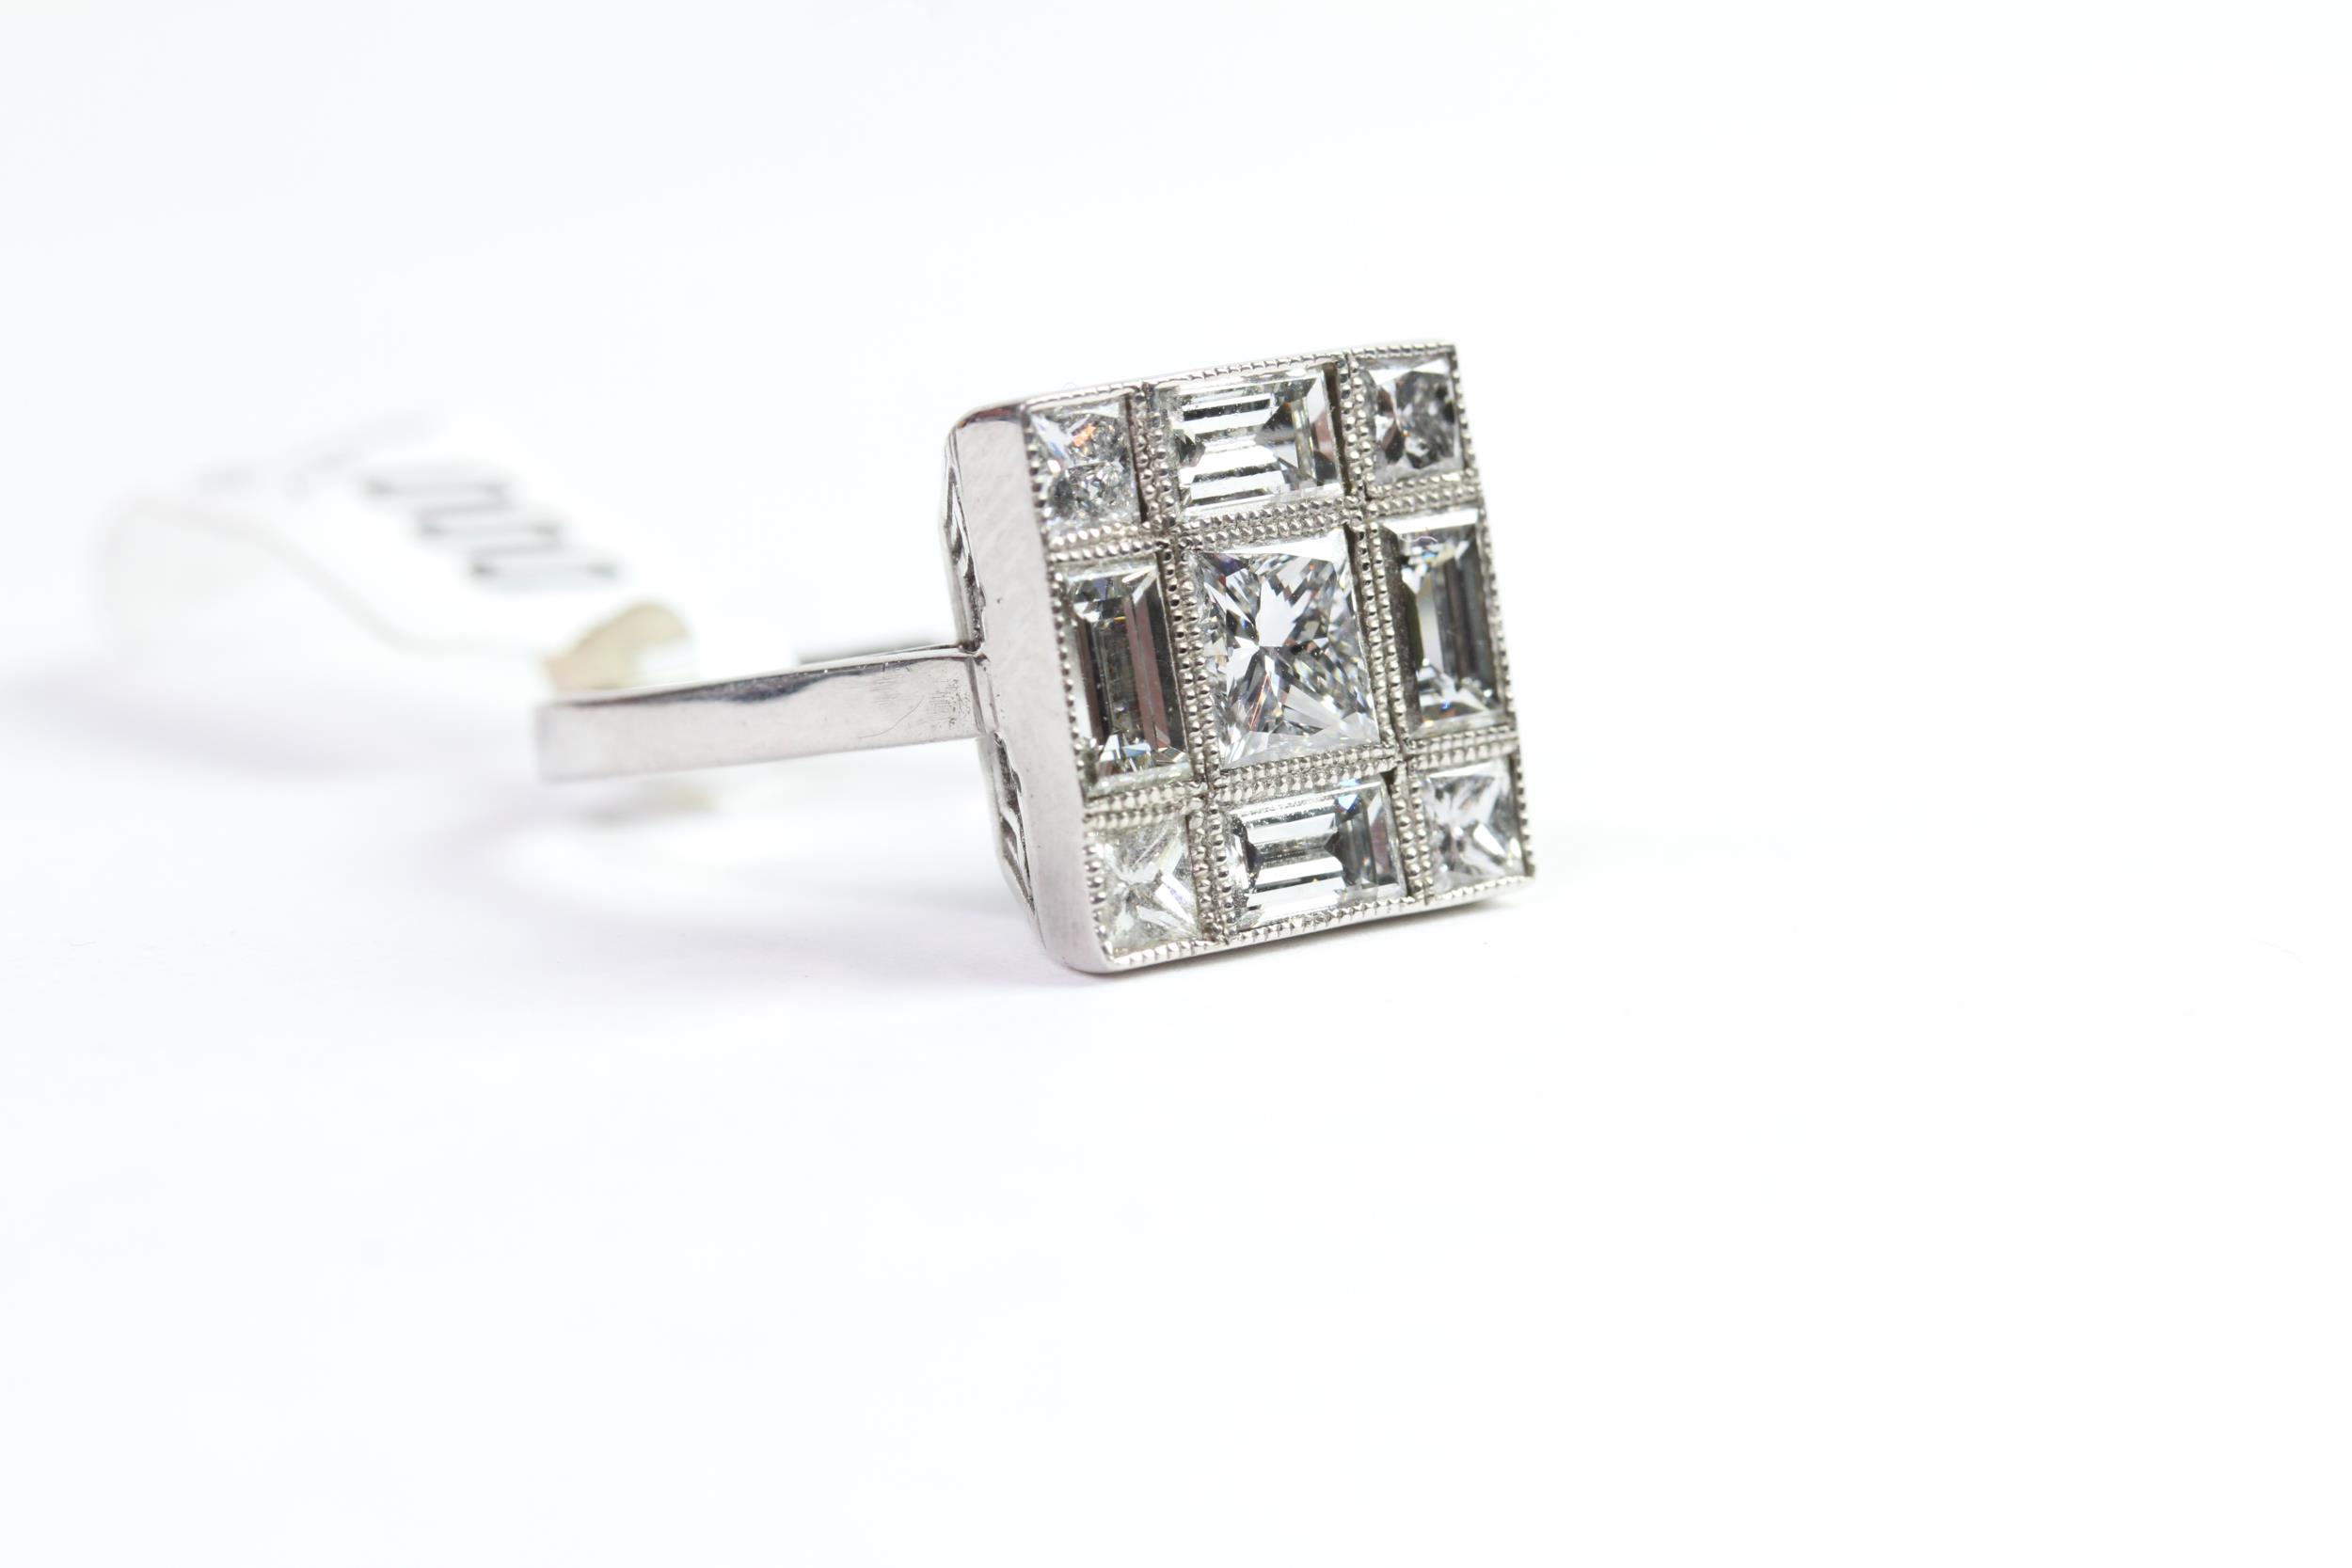 2.40ct Diamond Tablet Ring, Princess cut and Emerald Cut Diamonds, estimated total weight 2.40ct, - Image 4 of 4